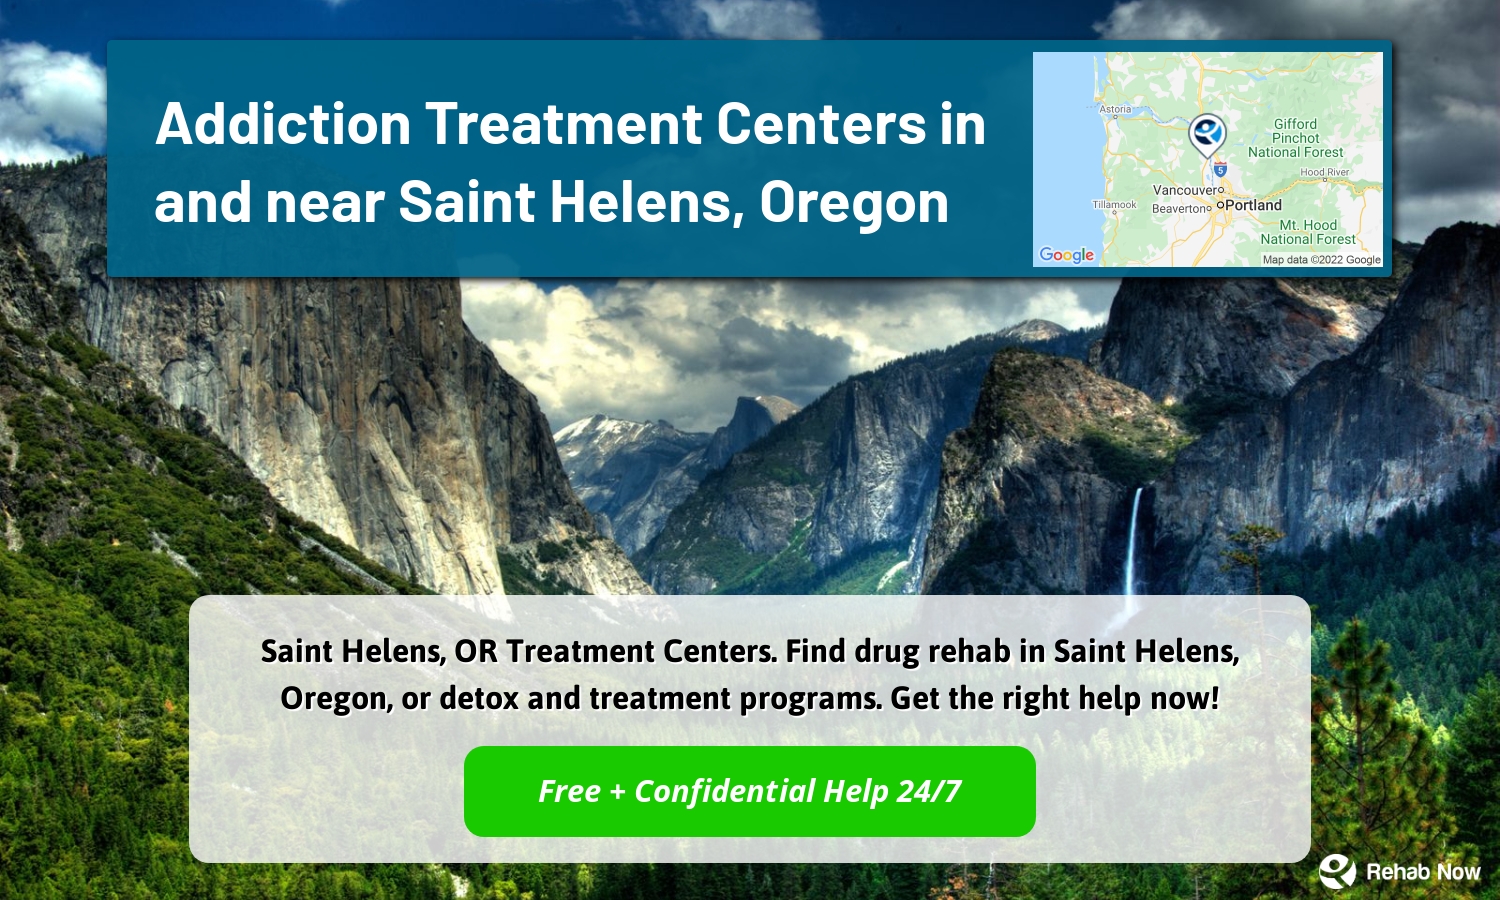 Saint Helens, OR Treatment Centers. Find drug rehab in Saint Helens, Oregon, or detox and treatment programs. Get the right help now!